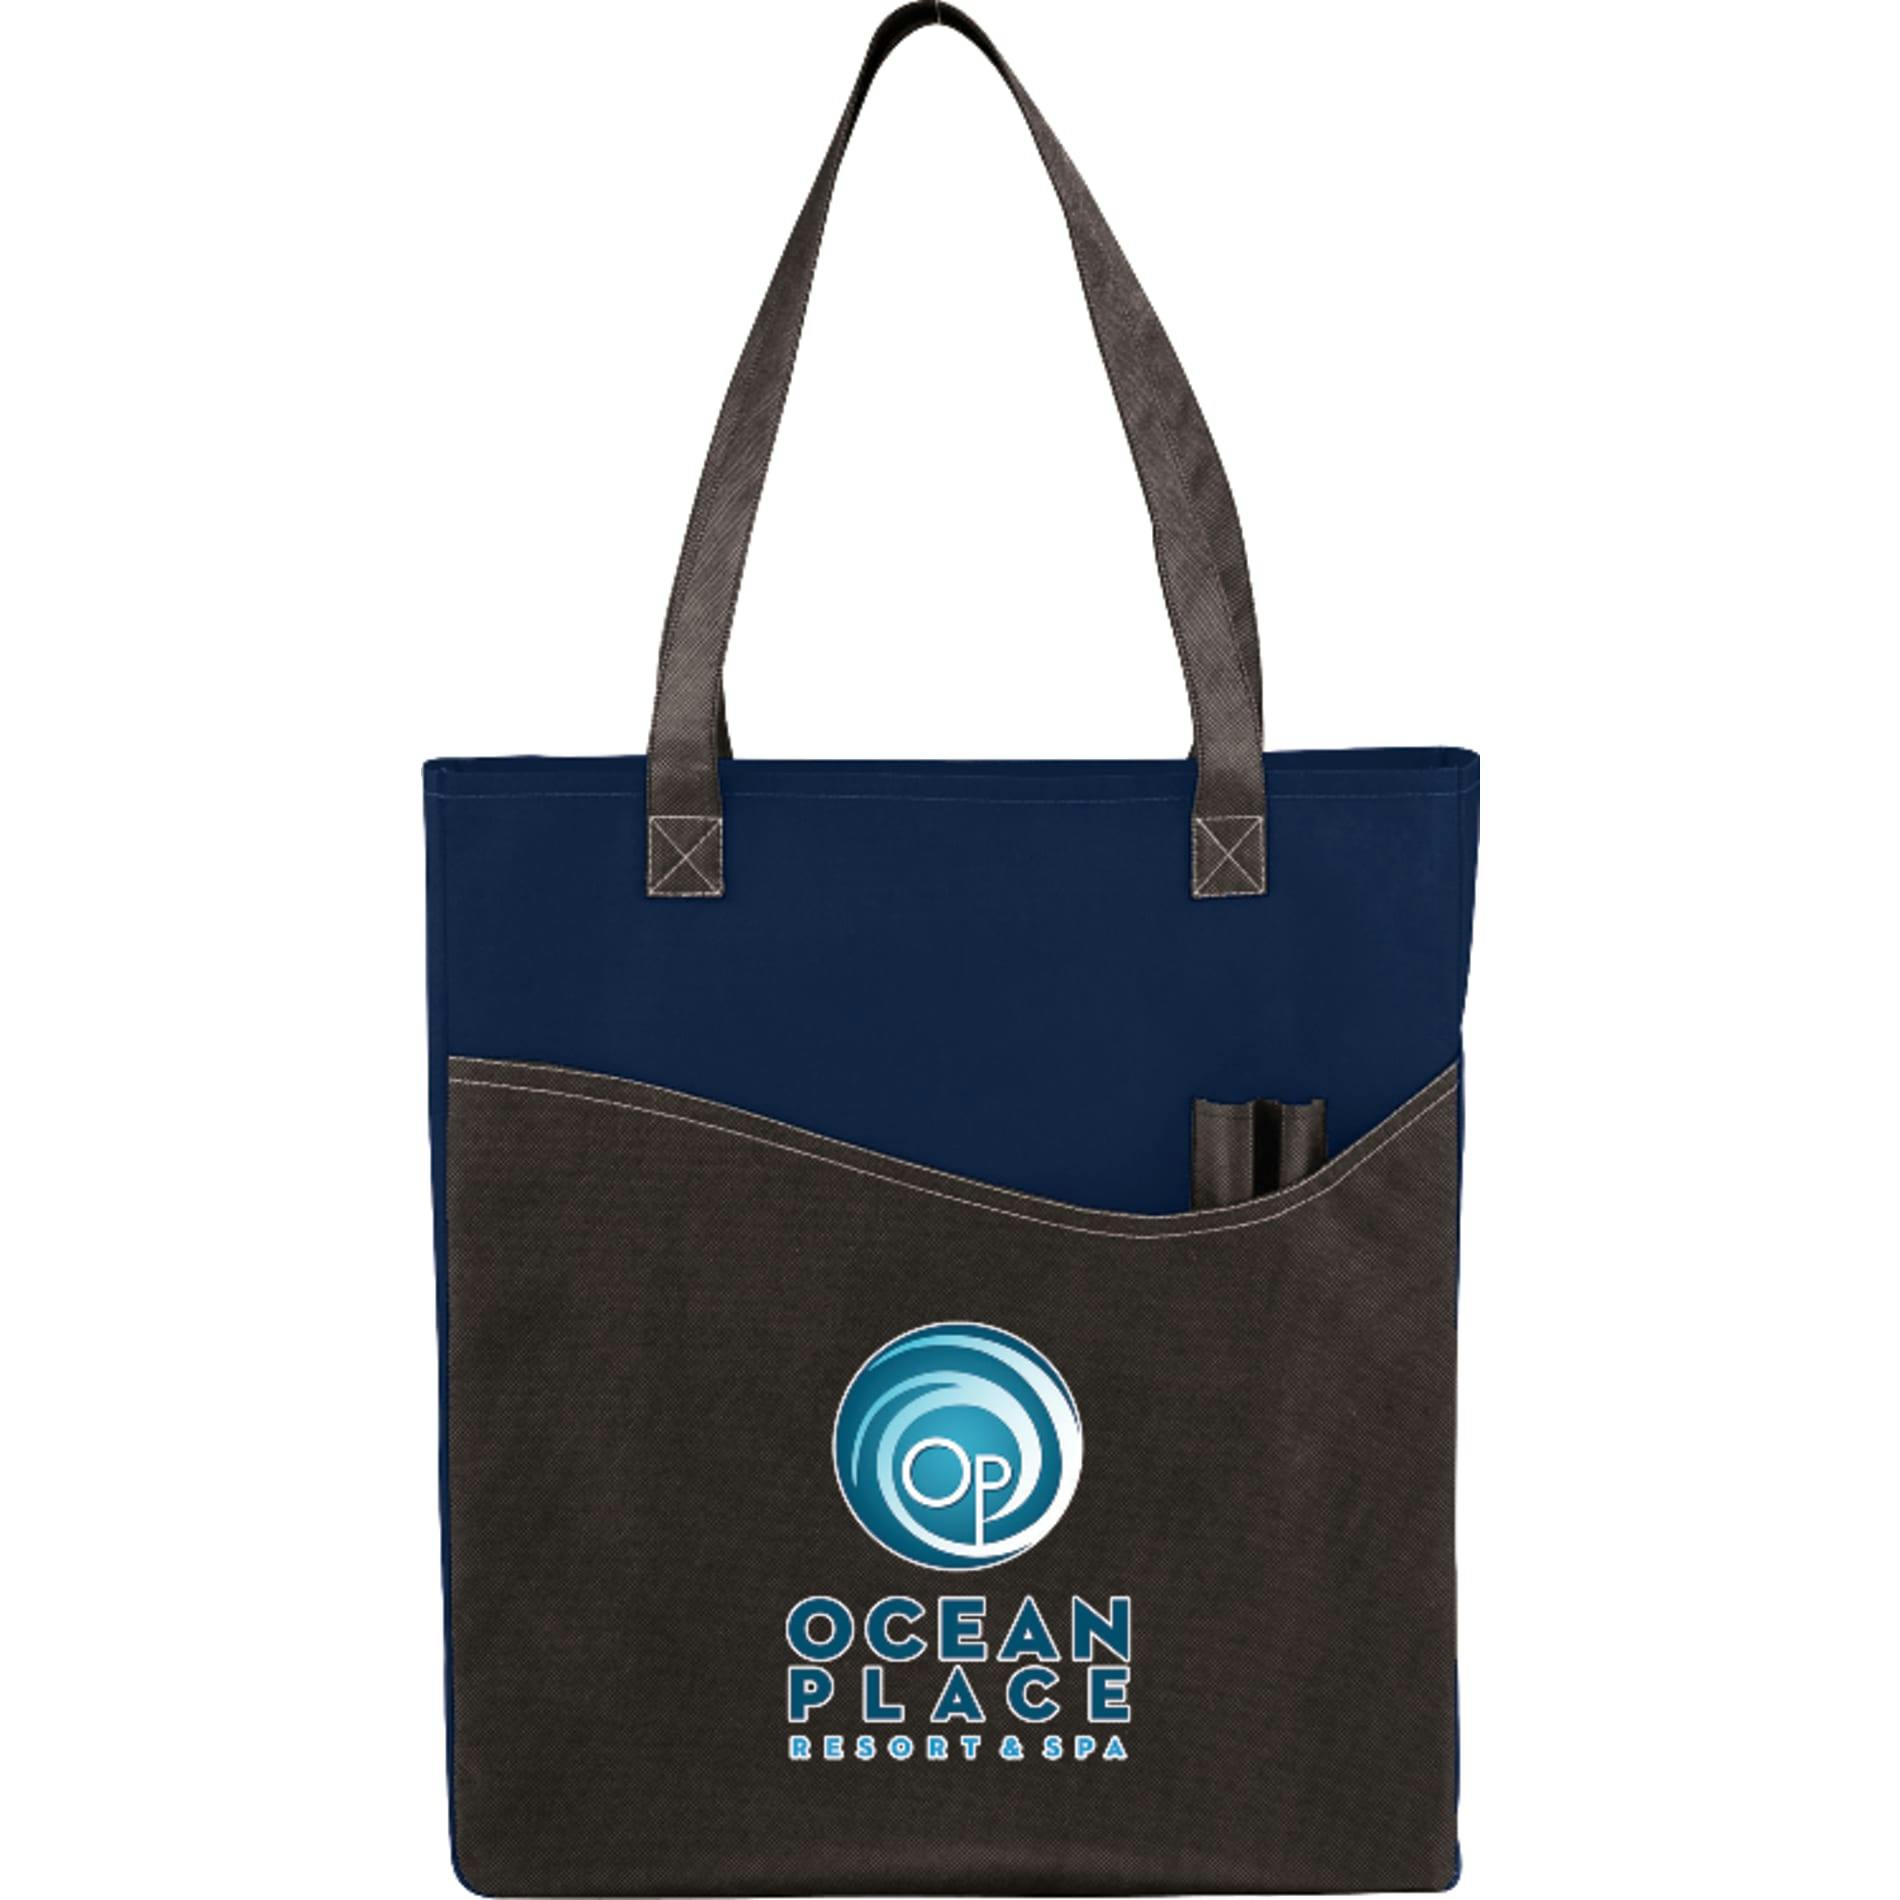 Rivers Pocket Non-Woven Convention Tote - additional Image 3